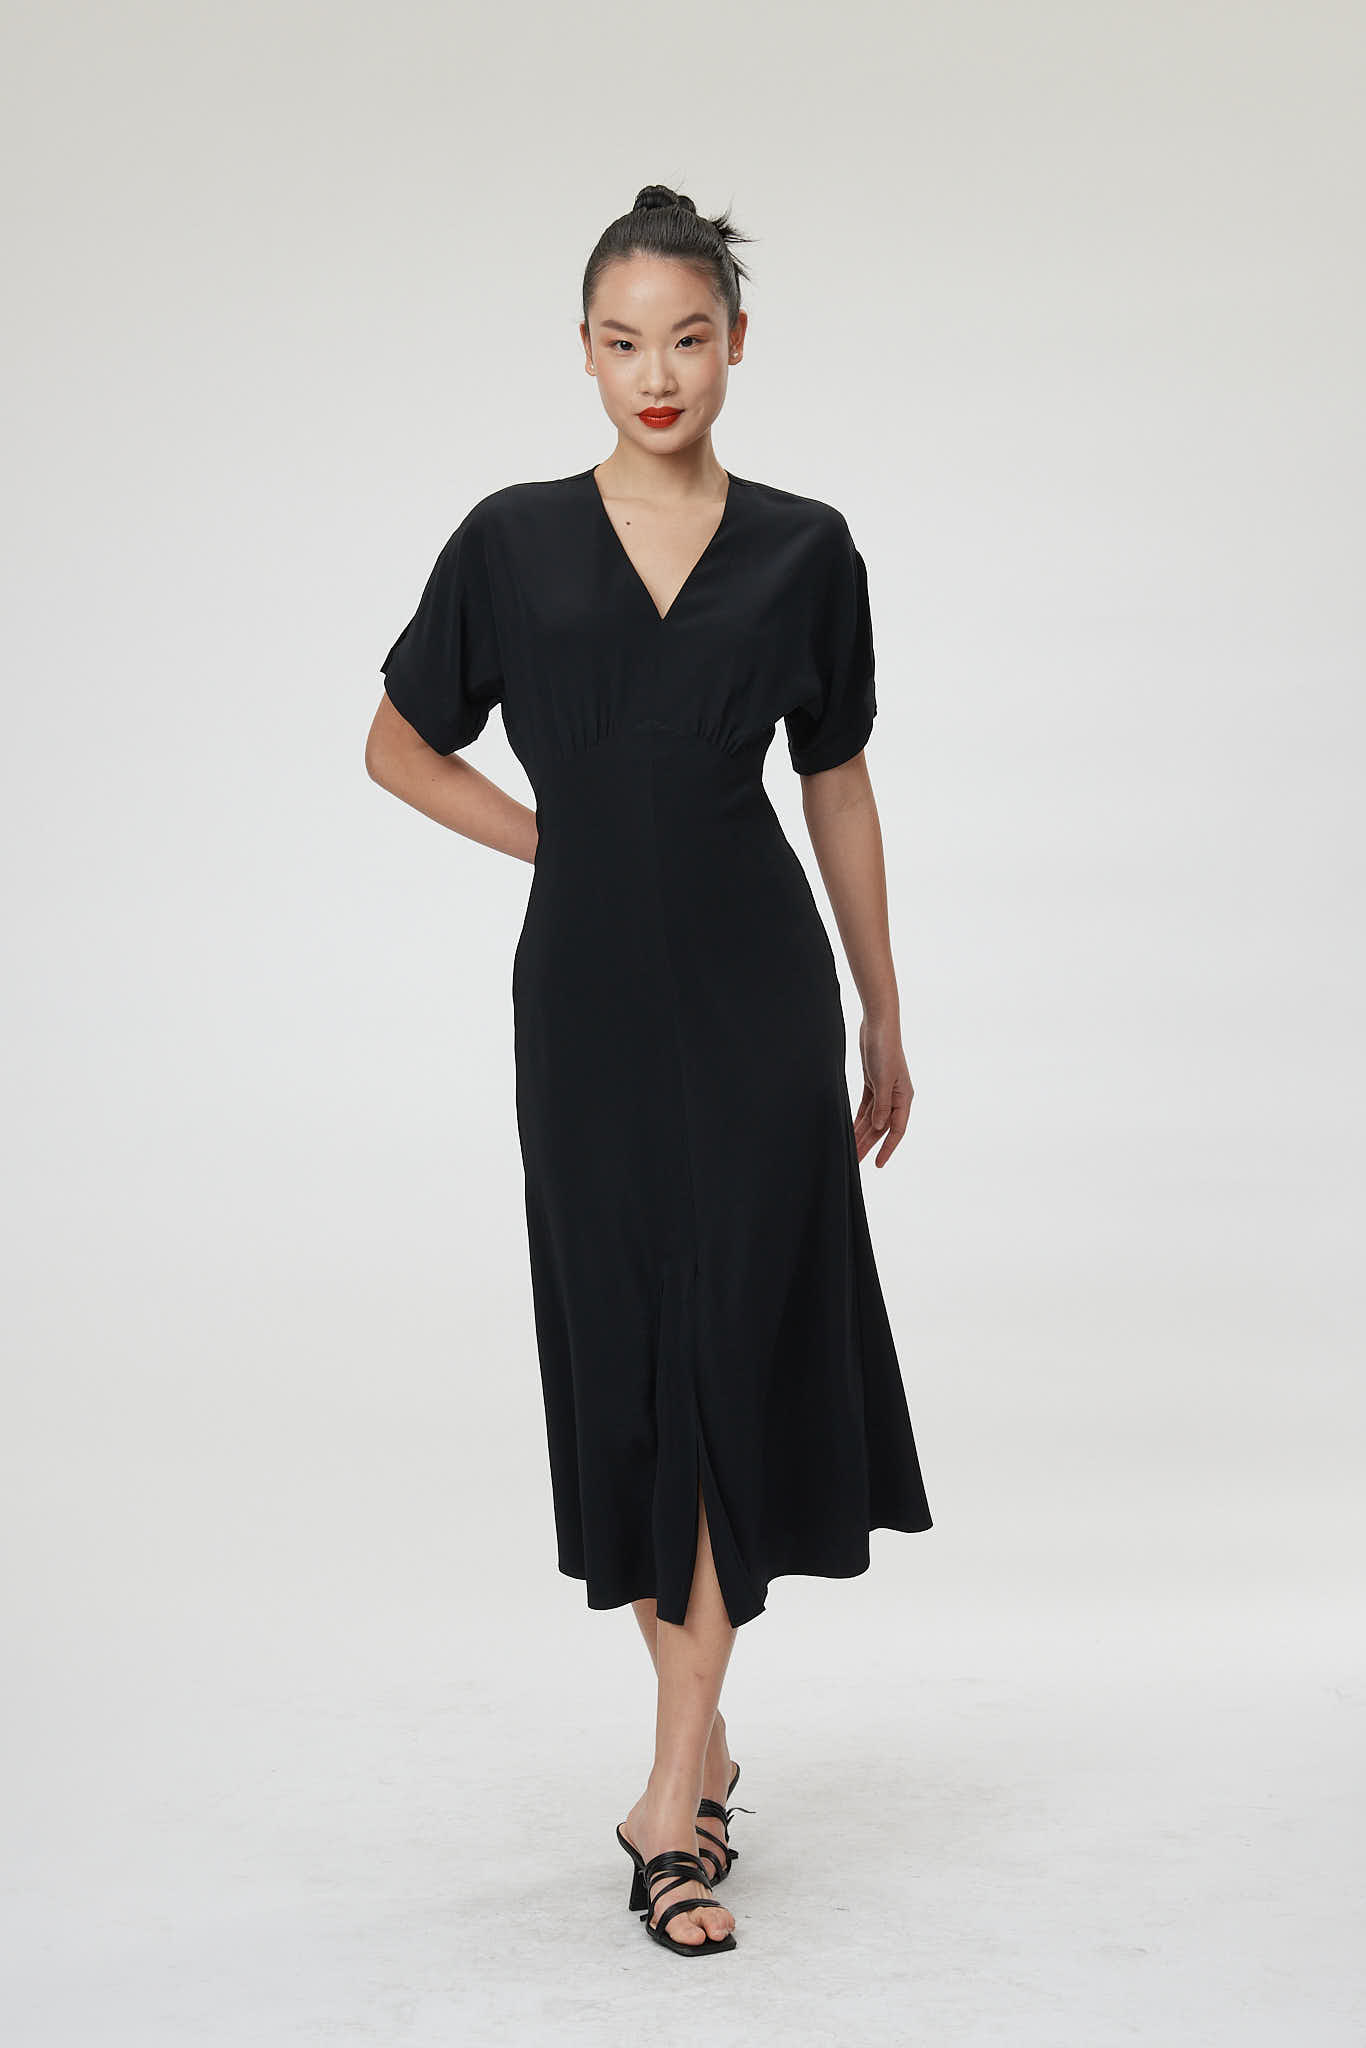 Bologna Dress – A-line day-to-night dress in black